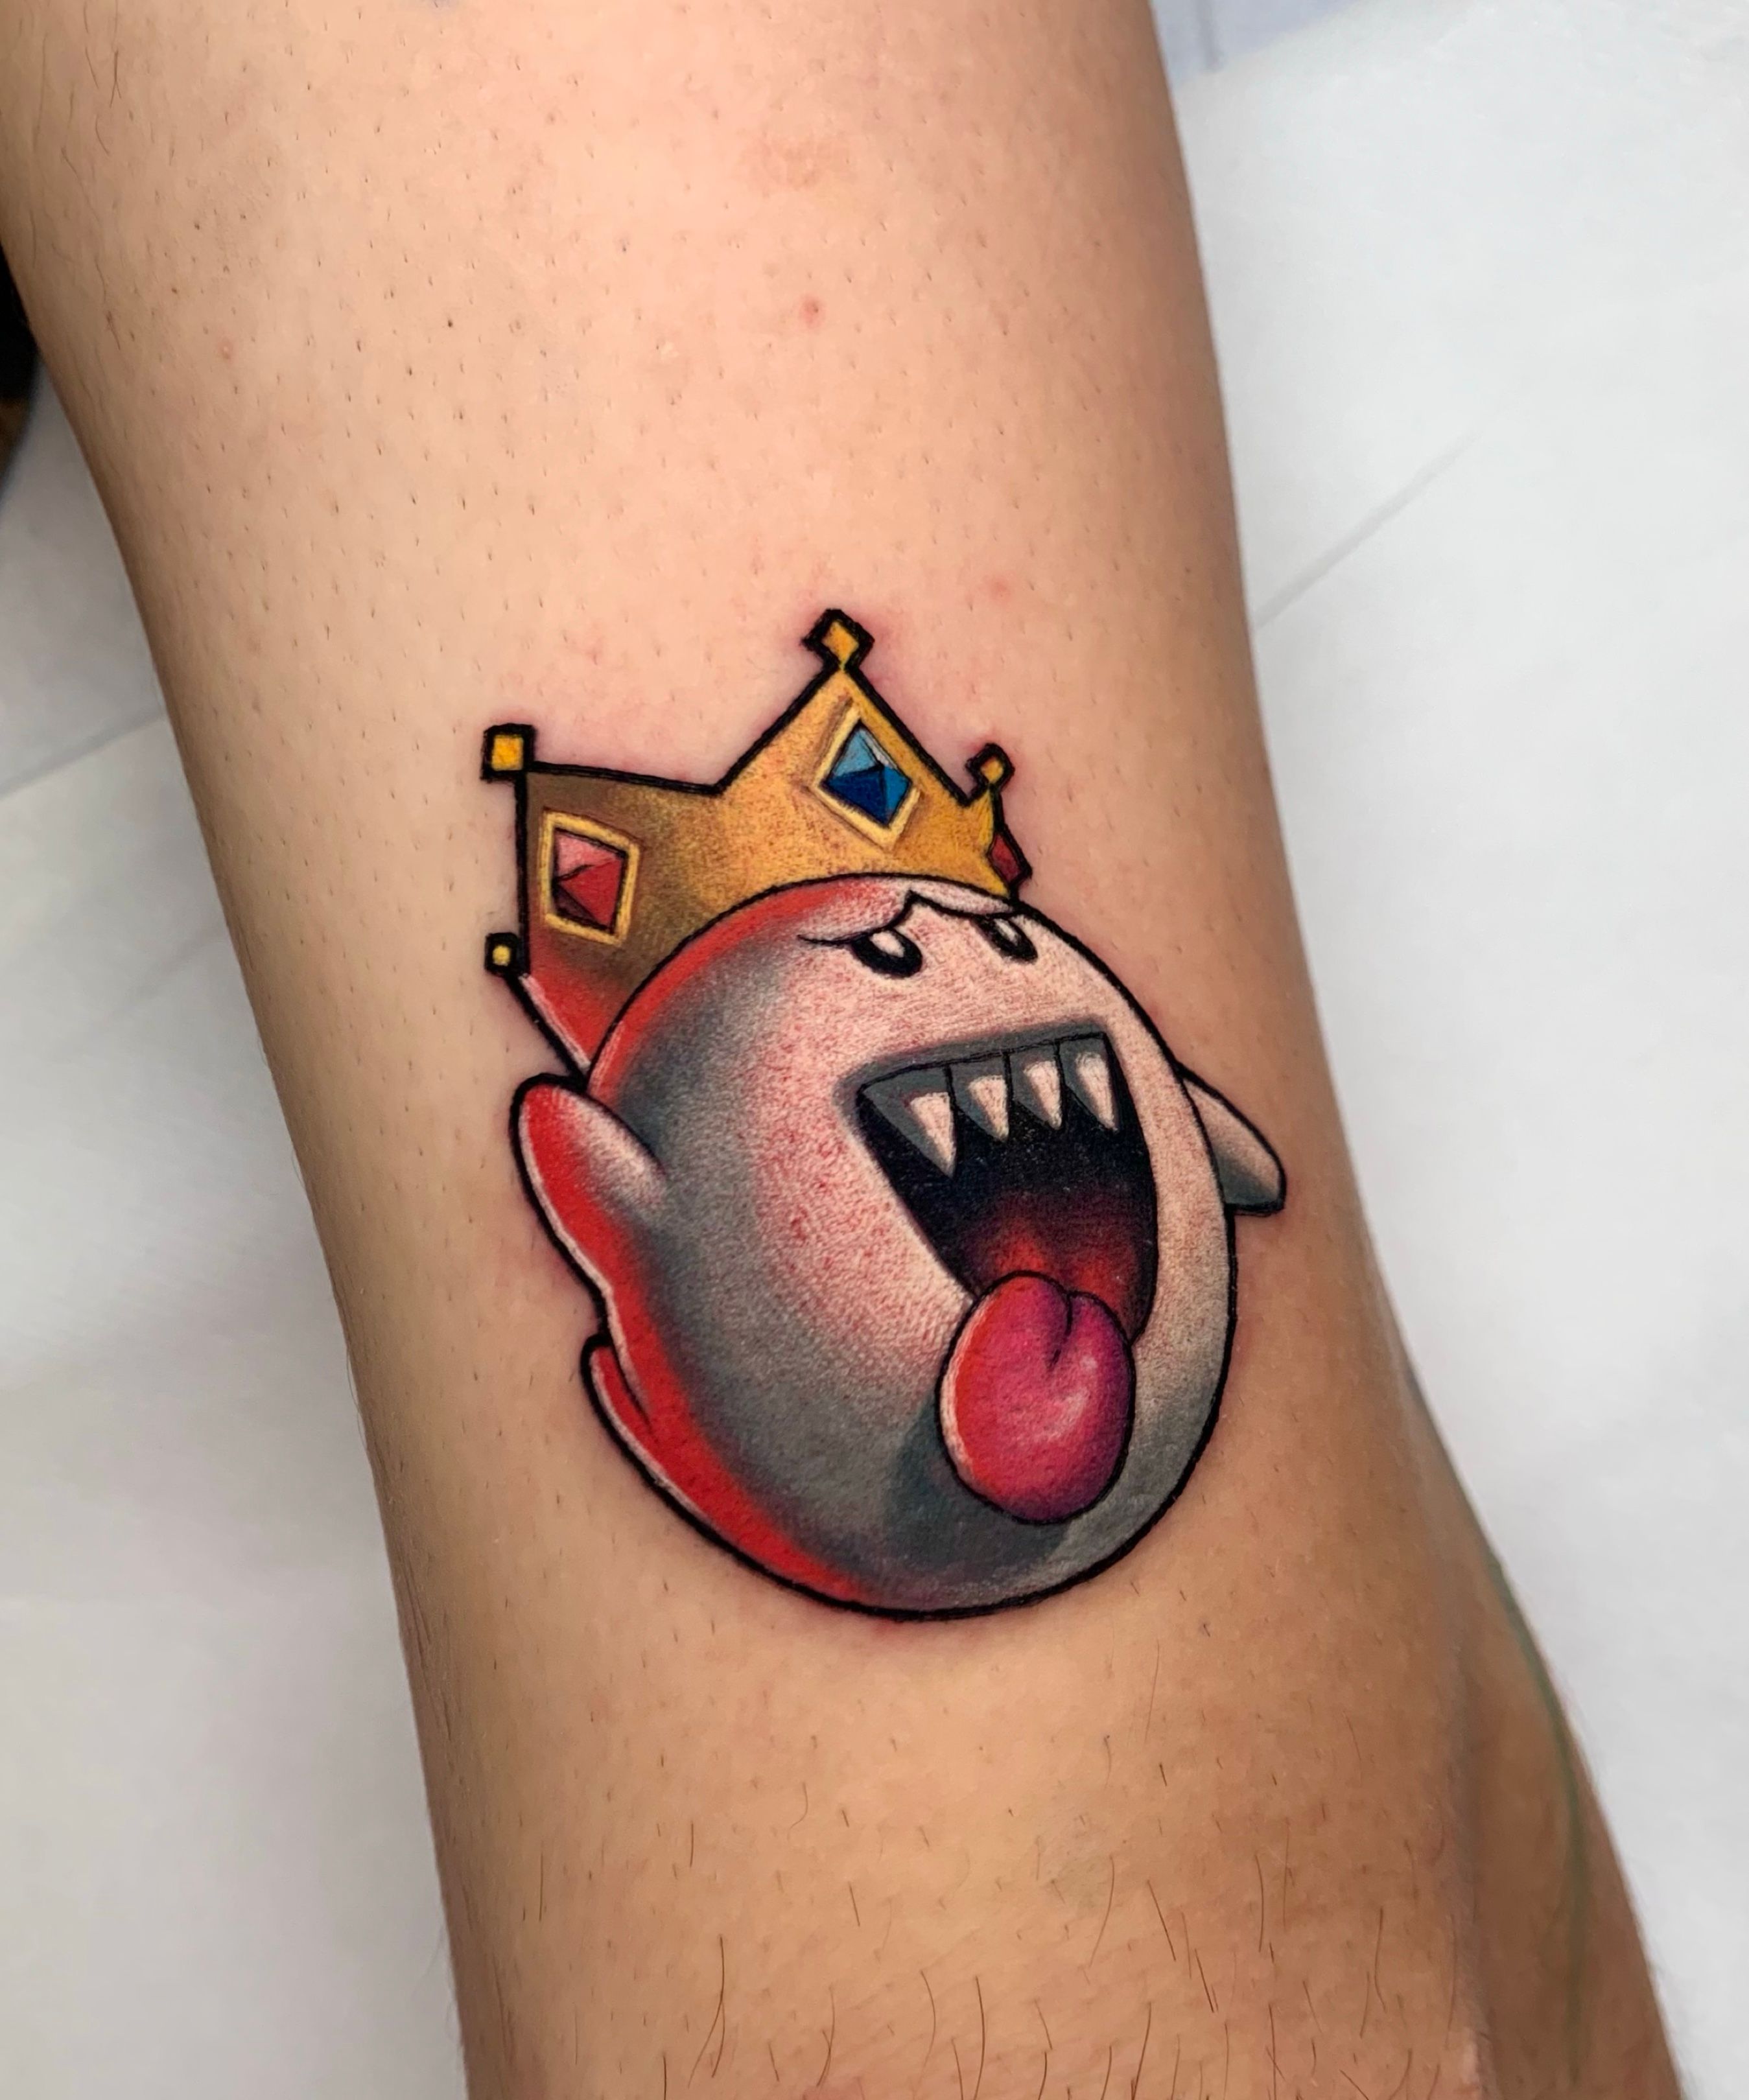 Fawkes  Nuke Best Friends on Instagram  Crazy King Boo tattoo by  iimmerse Thanks Billy  kingboo boo mario mariotattoo nintendo  Nintendotattoo videogametattoo